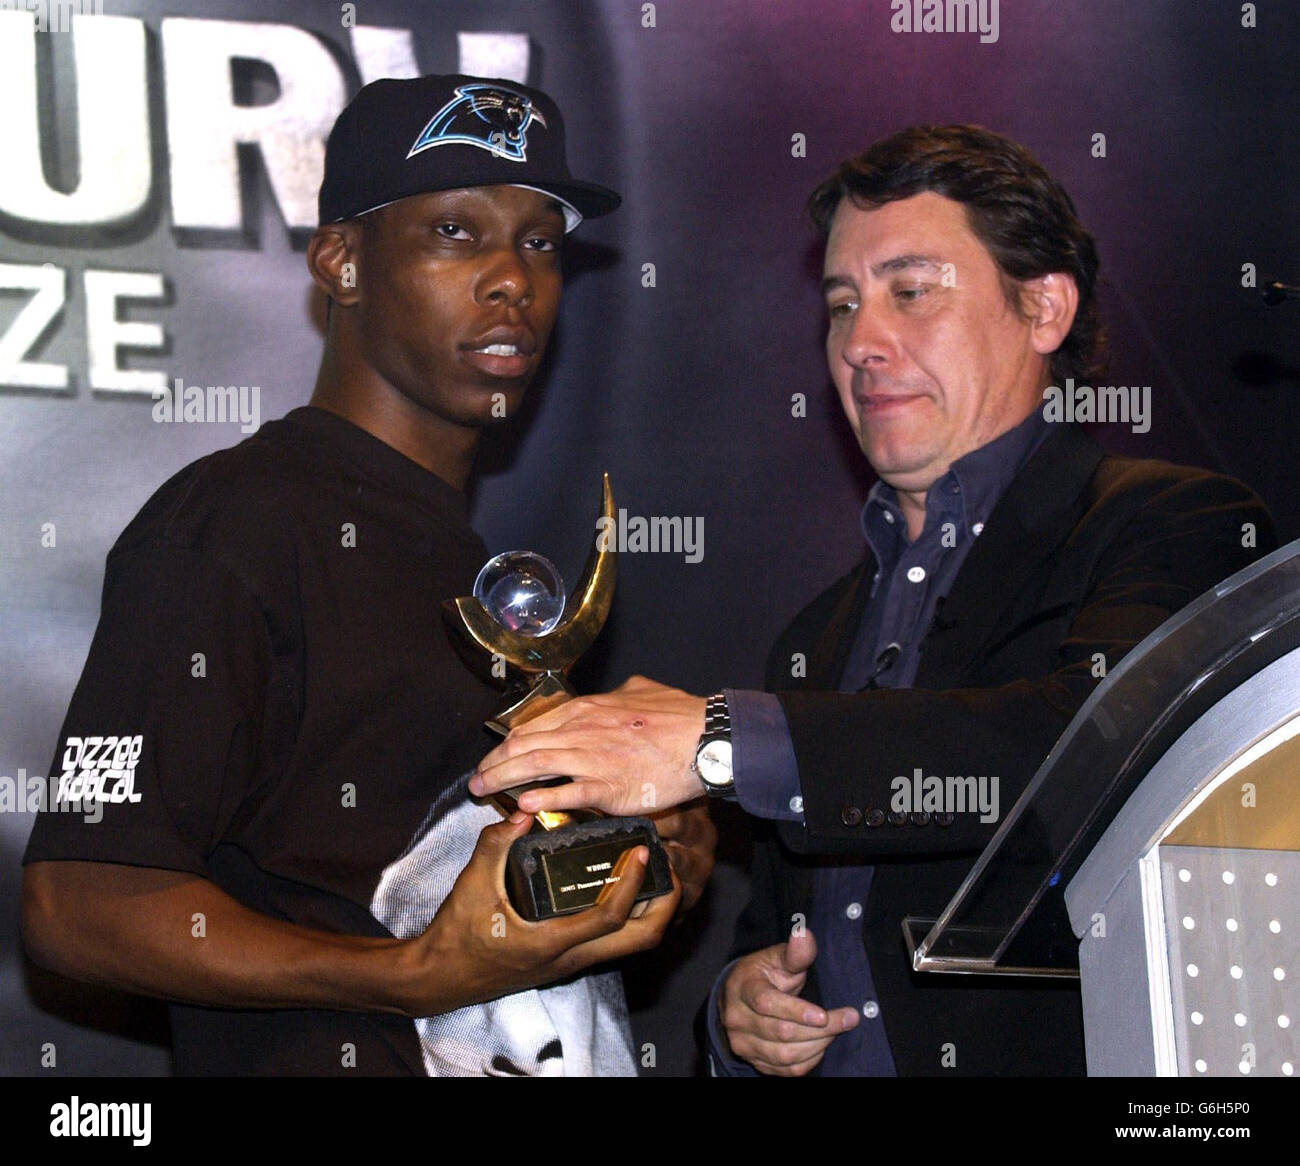 19-year-old Garage star Dizzee Rascal receives the Panasonic Mercury Music Prize for his album 'Boy In Da Corner' from host Jools Holland at the Grosvenor House Hotel in central London. Stock Photo